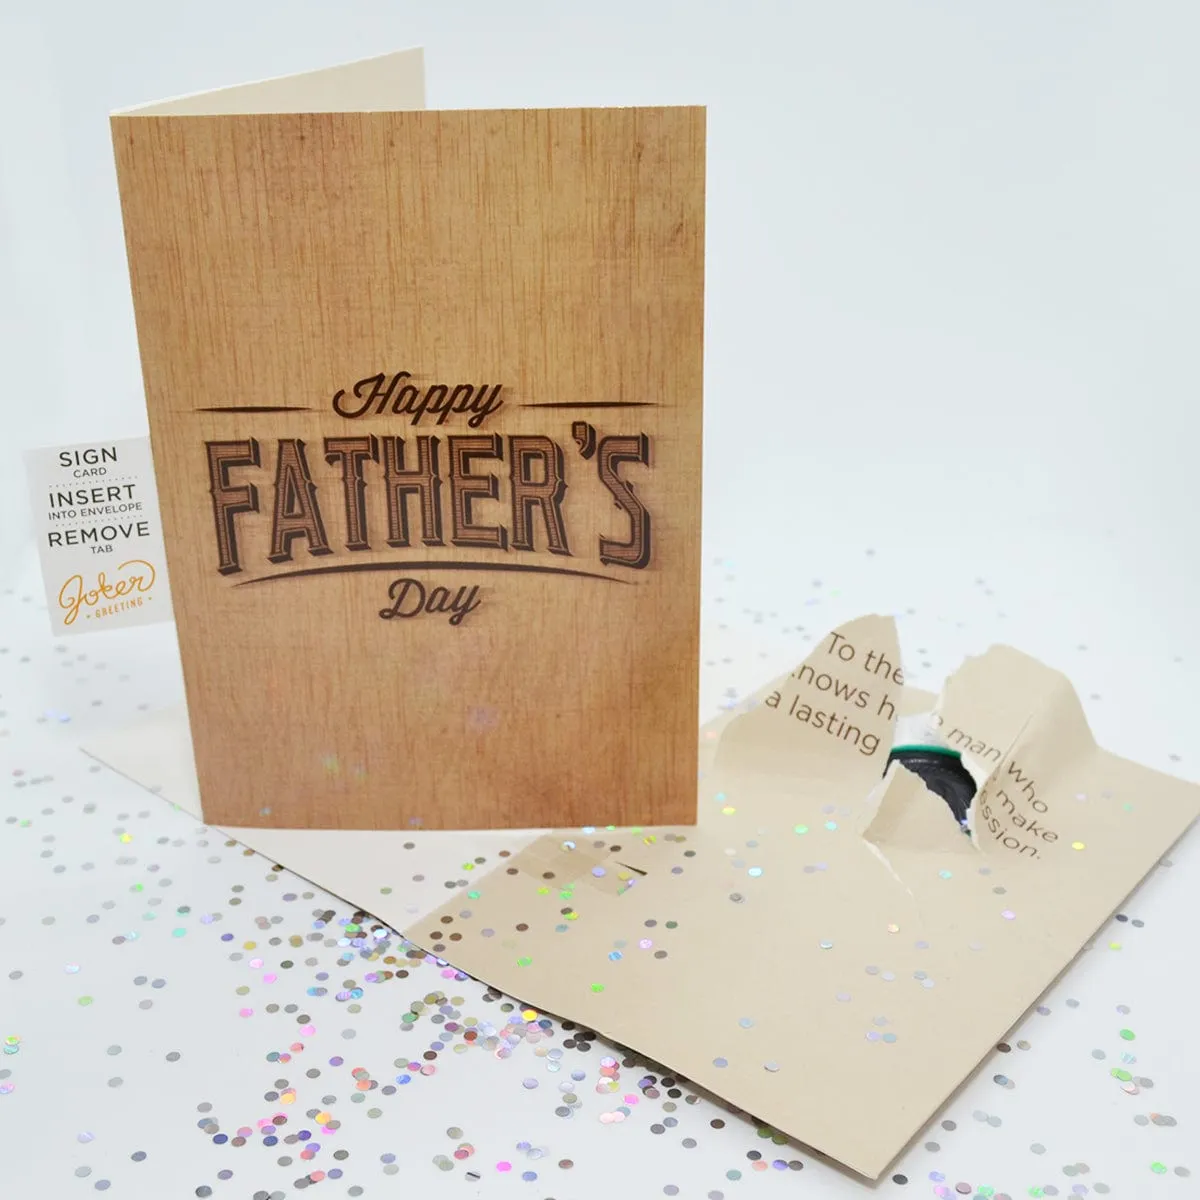 🔥Endless Farting Father's Day Card 👨‍👦🔊 - Joker Greeting Prank Card (Sequin + Sound)